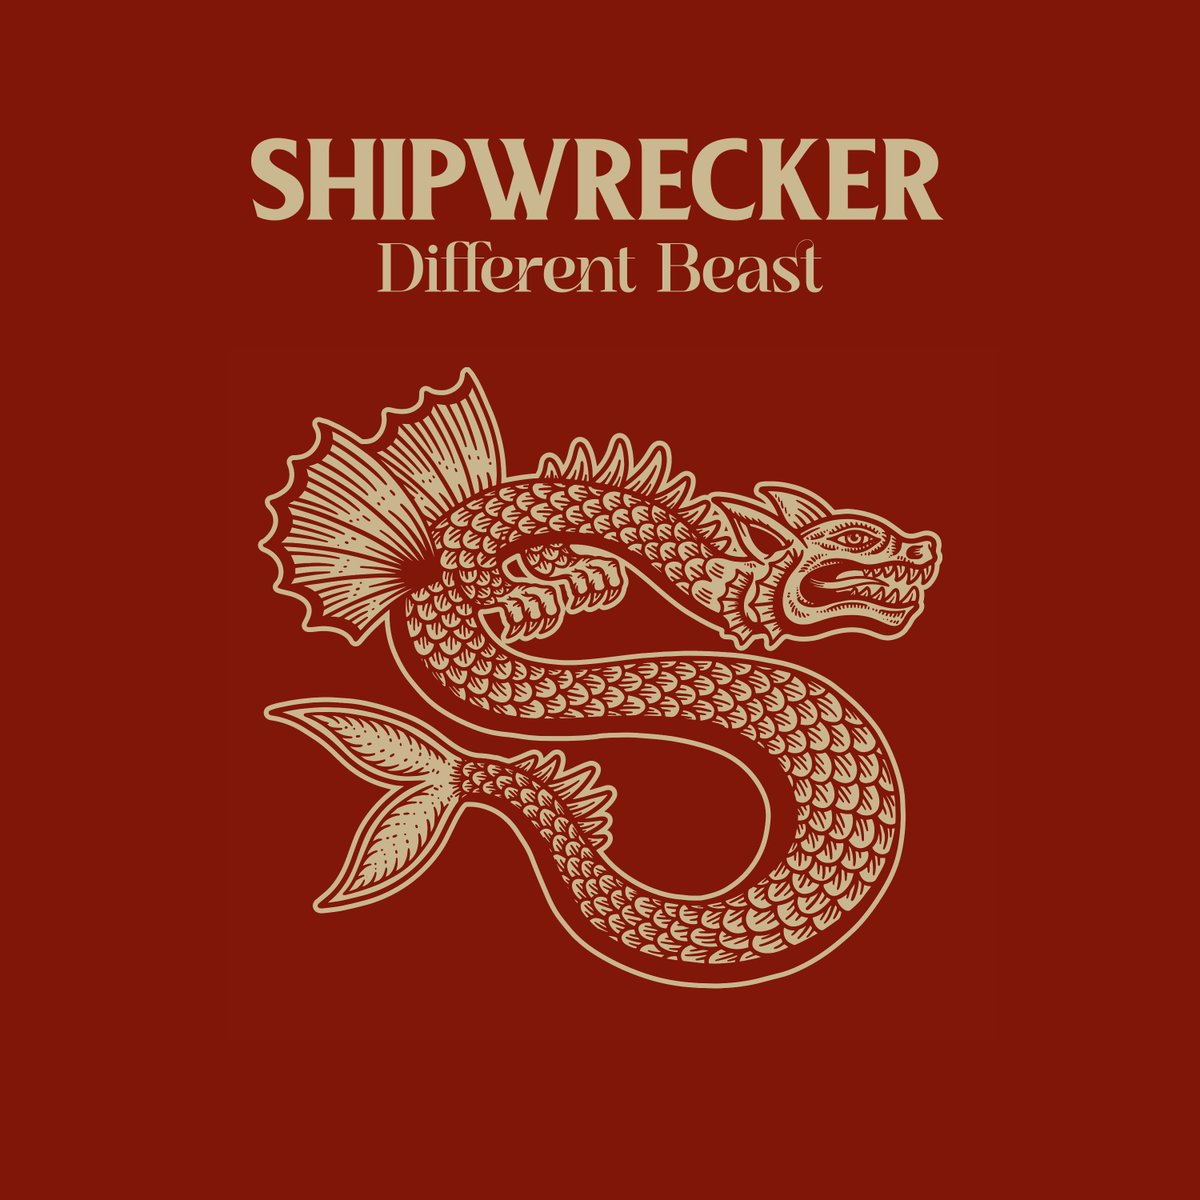 FULL FORCE FRIDAY:🆕August 4th Release #32🎧

SHIPWRECKER - Different Beast 🇬🇧 ☣️

Debut album from UK Groove Rock outfit ☣️

BC➡️shipwreckerband.bandcamp.com/album/differen… ☣️

#ShipwreckerBand #DifferentBeast #GrooveRock @SaNPRUK #FFFAug4 #KMäN